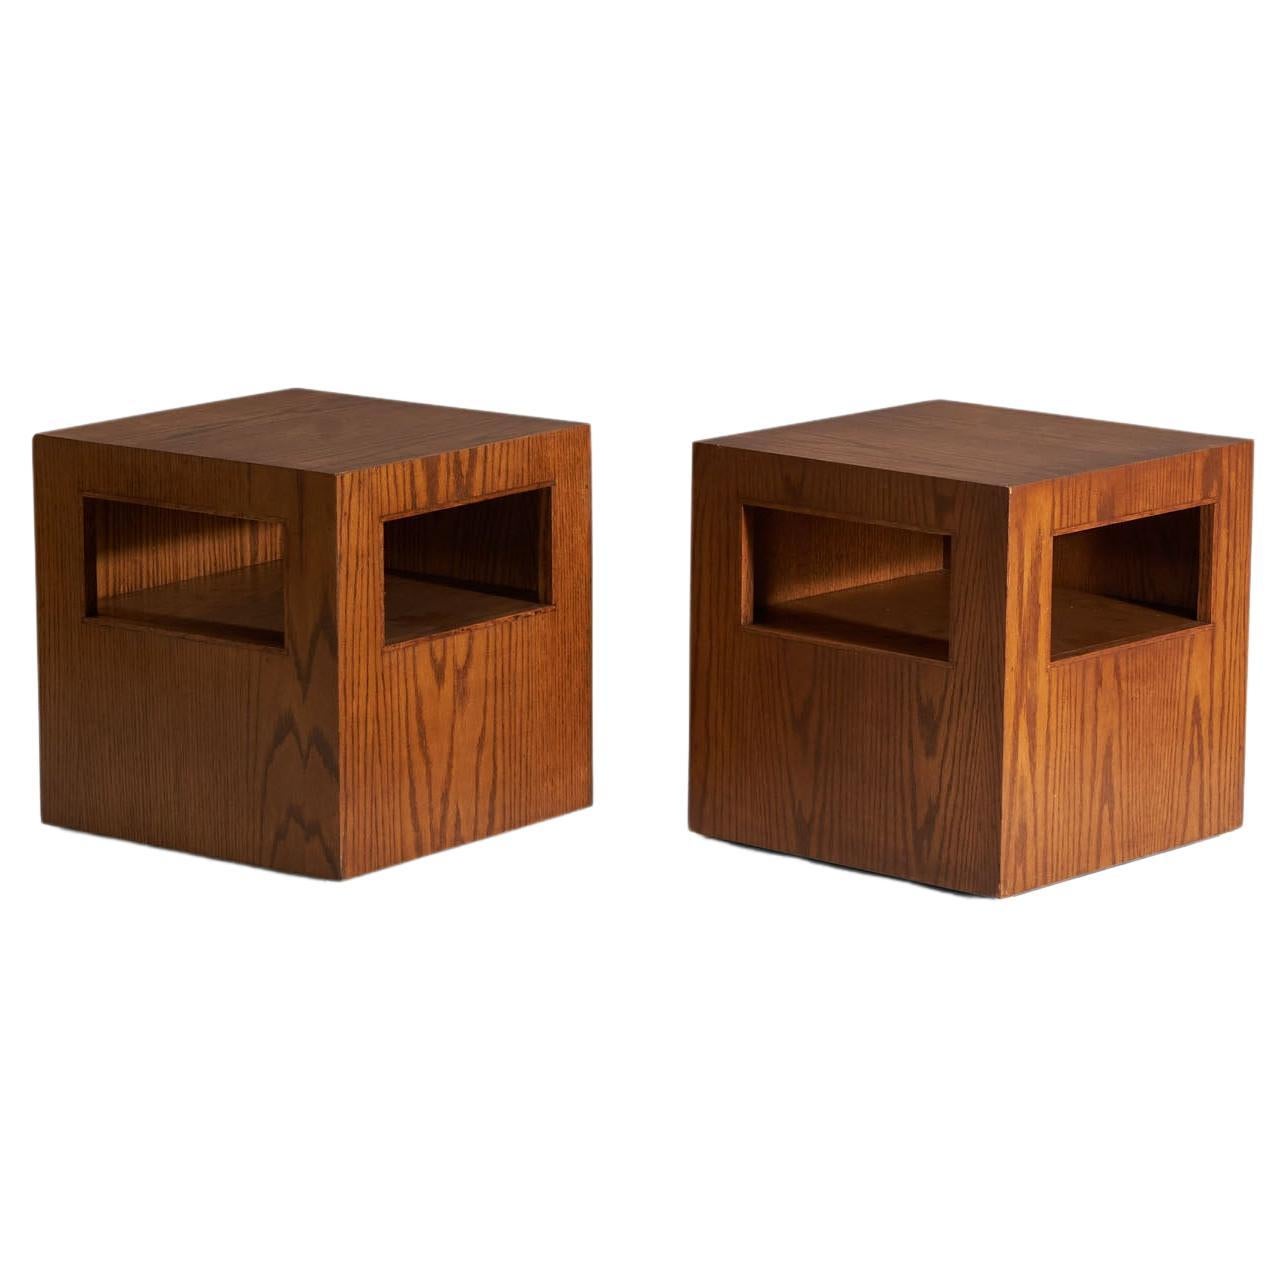 American Designer, Pair of Stools or Side Tables, Pine Plywood, USA, 1970s